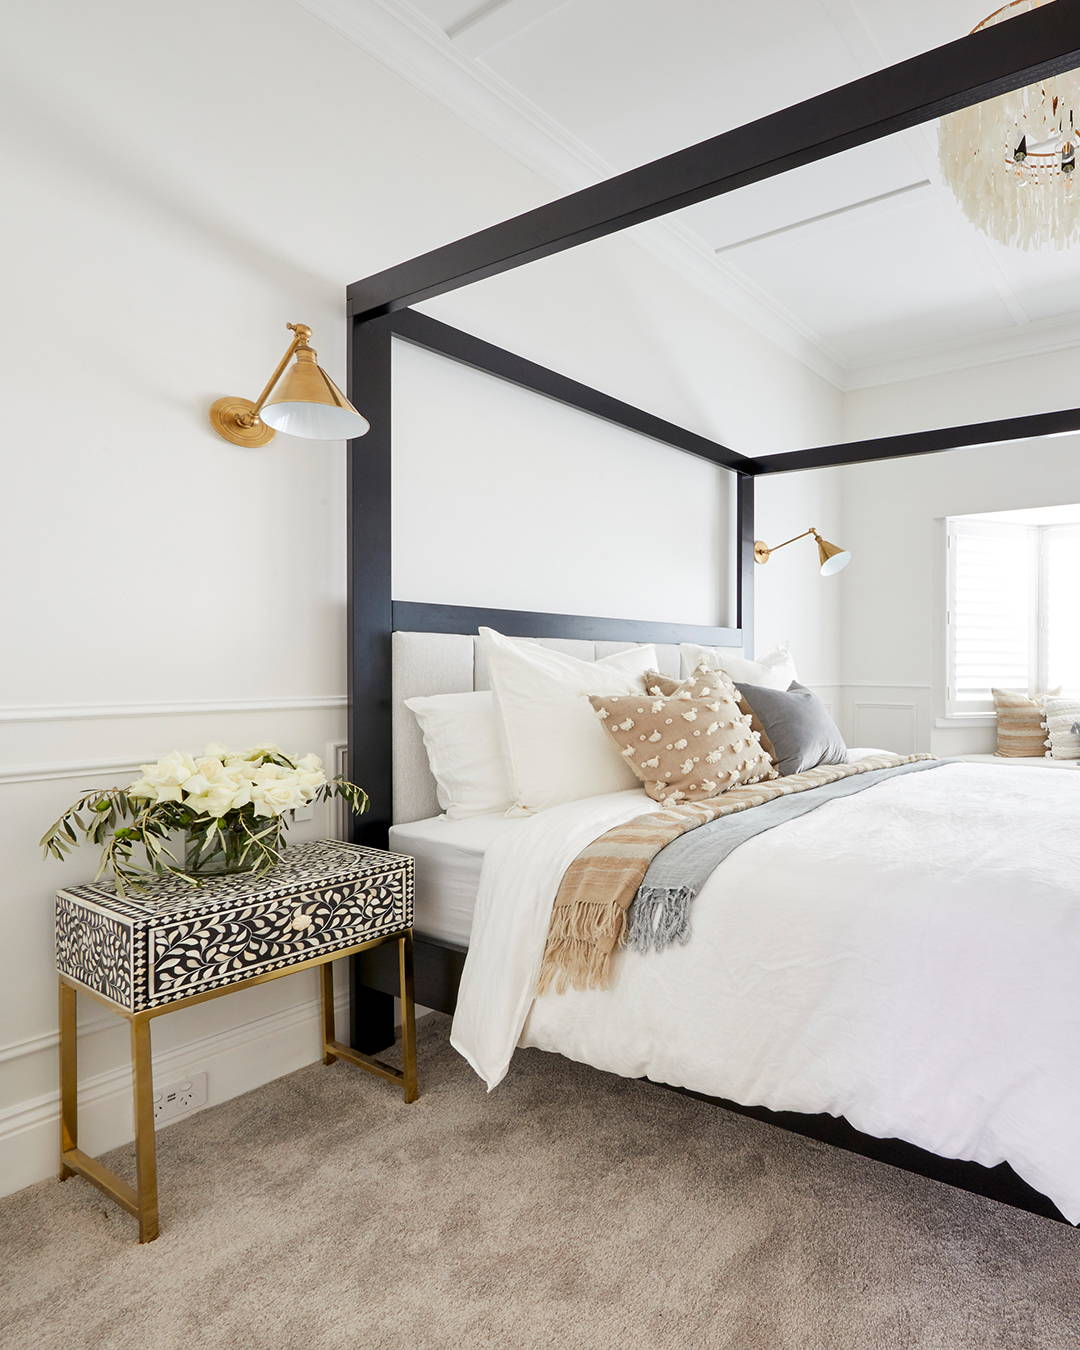 A bedroom setting with a four poster bed, lush white linens and fresh flowers on the bedside 